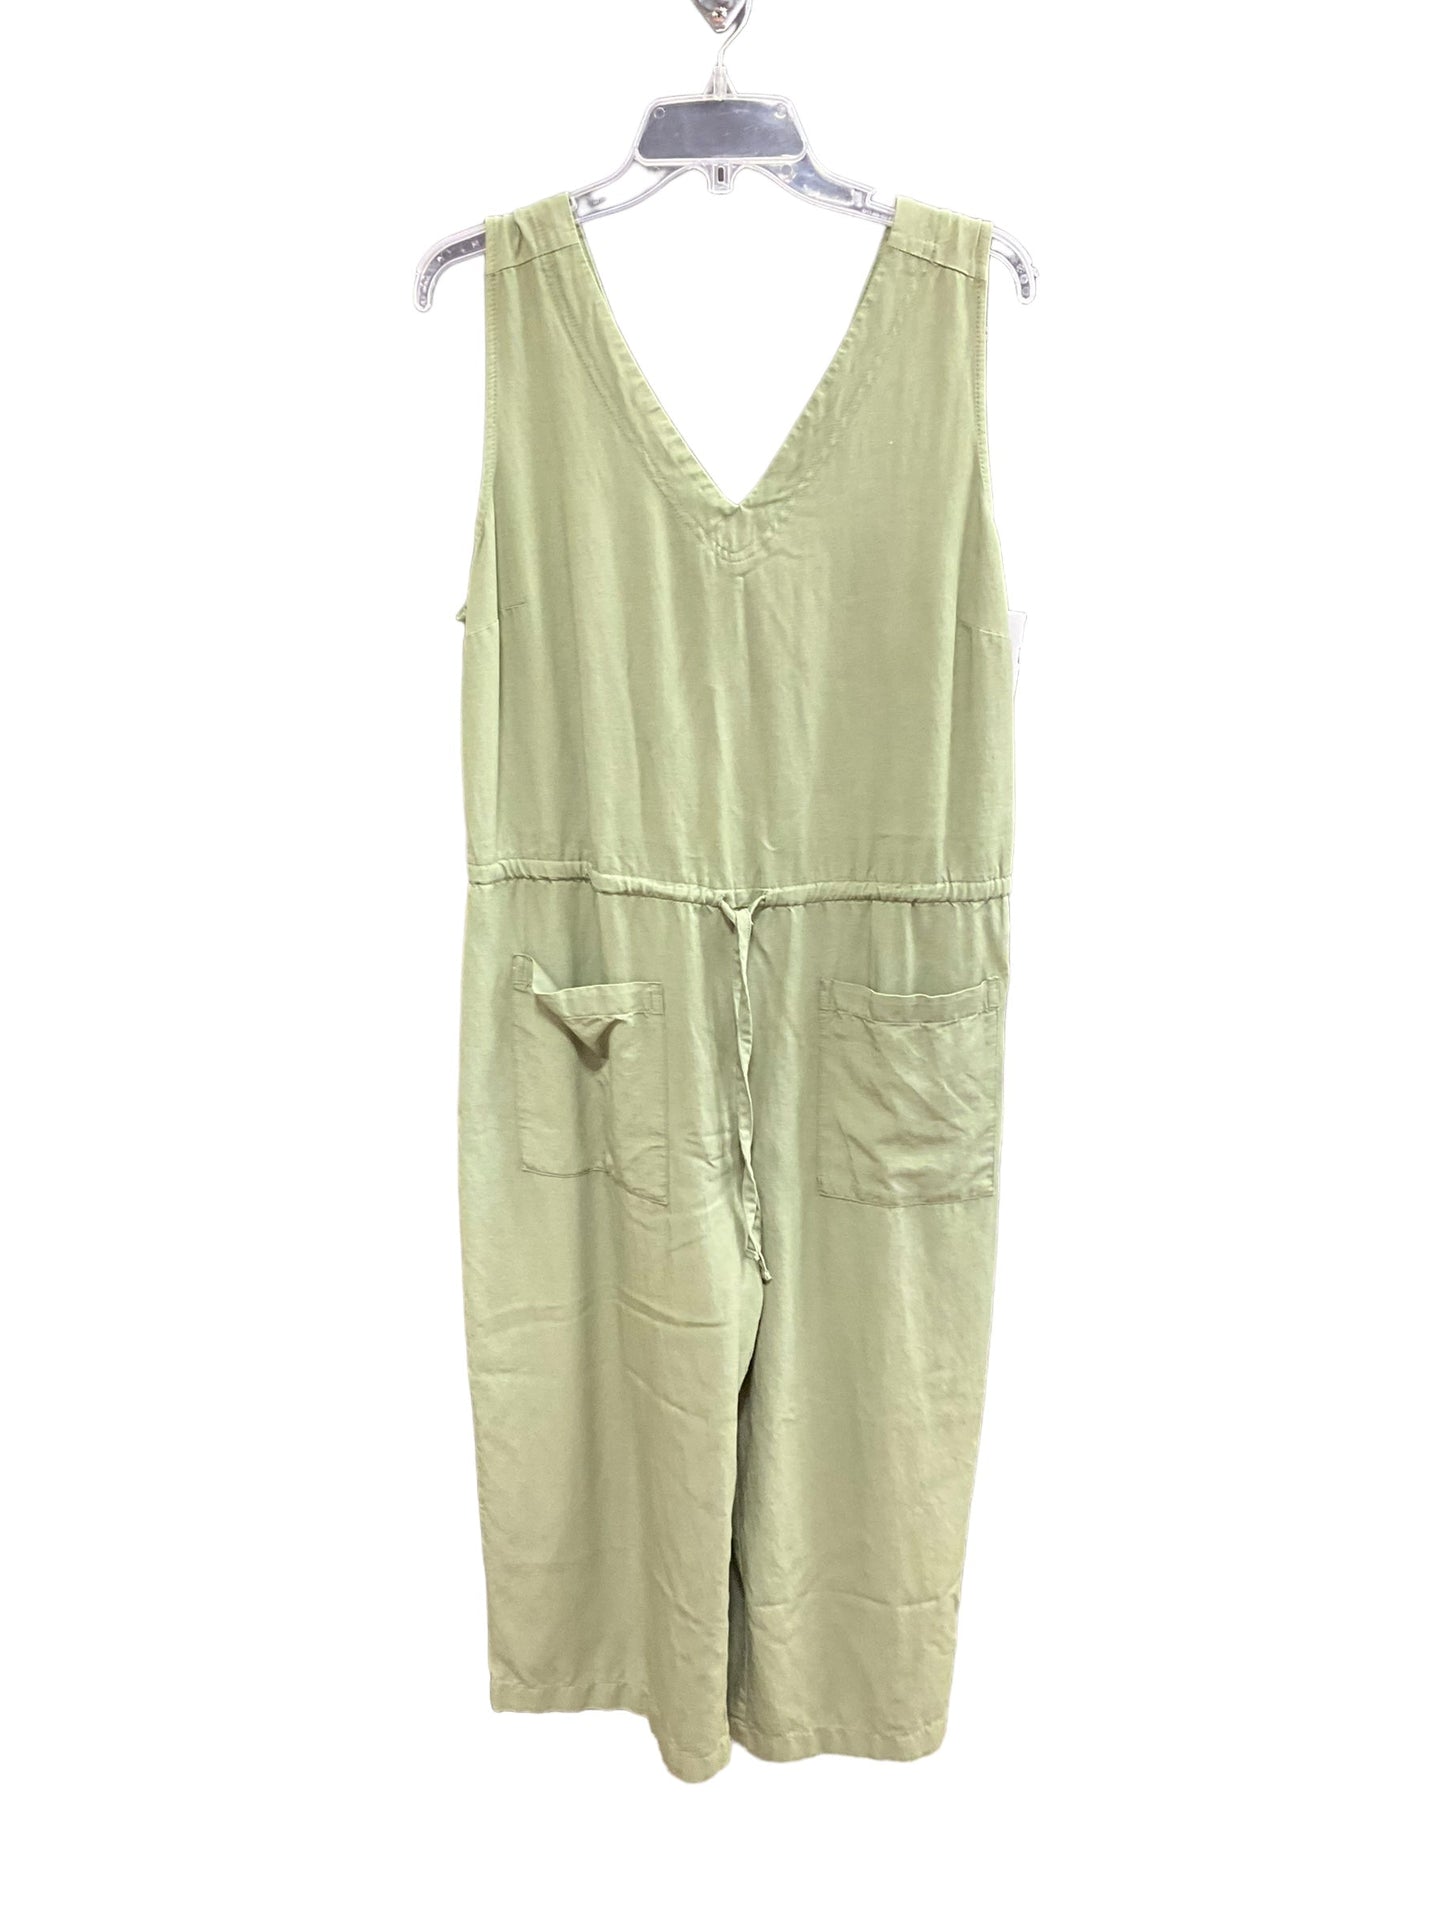 Green Jumpsuit Old Navy, Size L